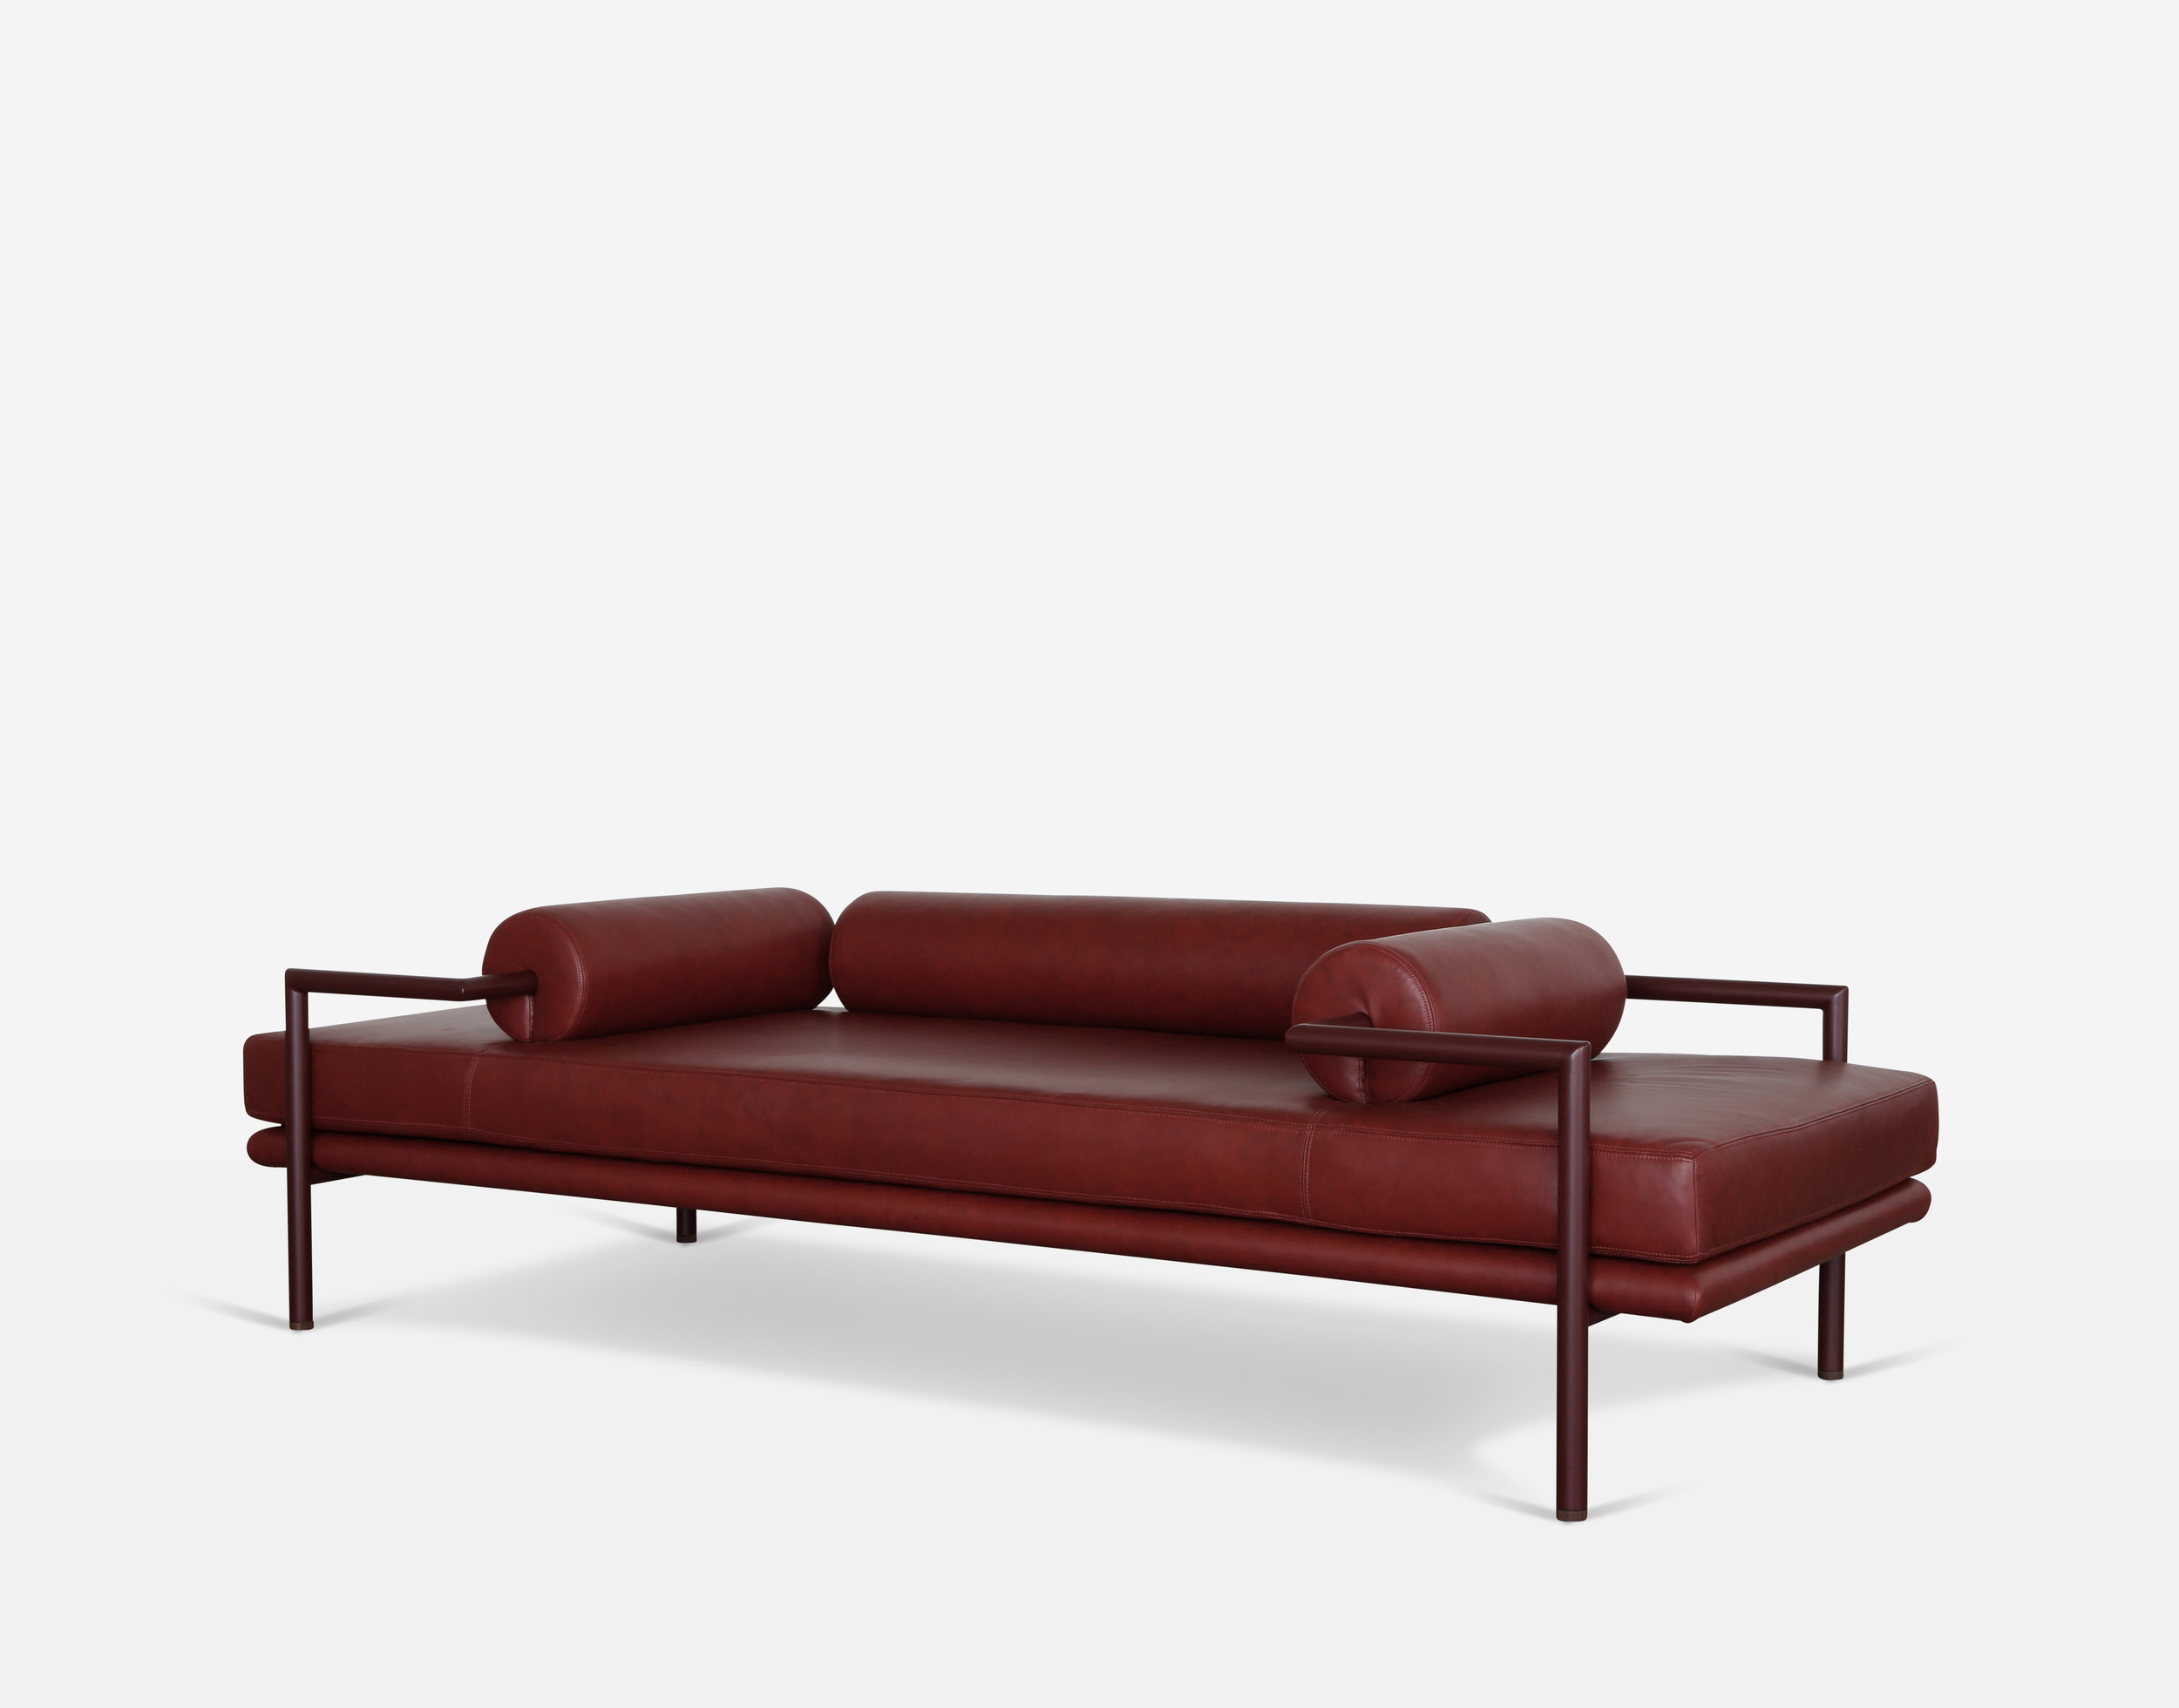 Luteca_JI_Dorcia-Daybed_Red Leather_FP-W.jpg